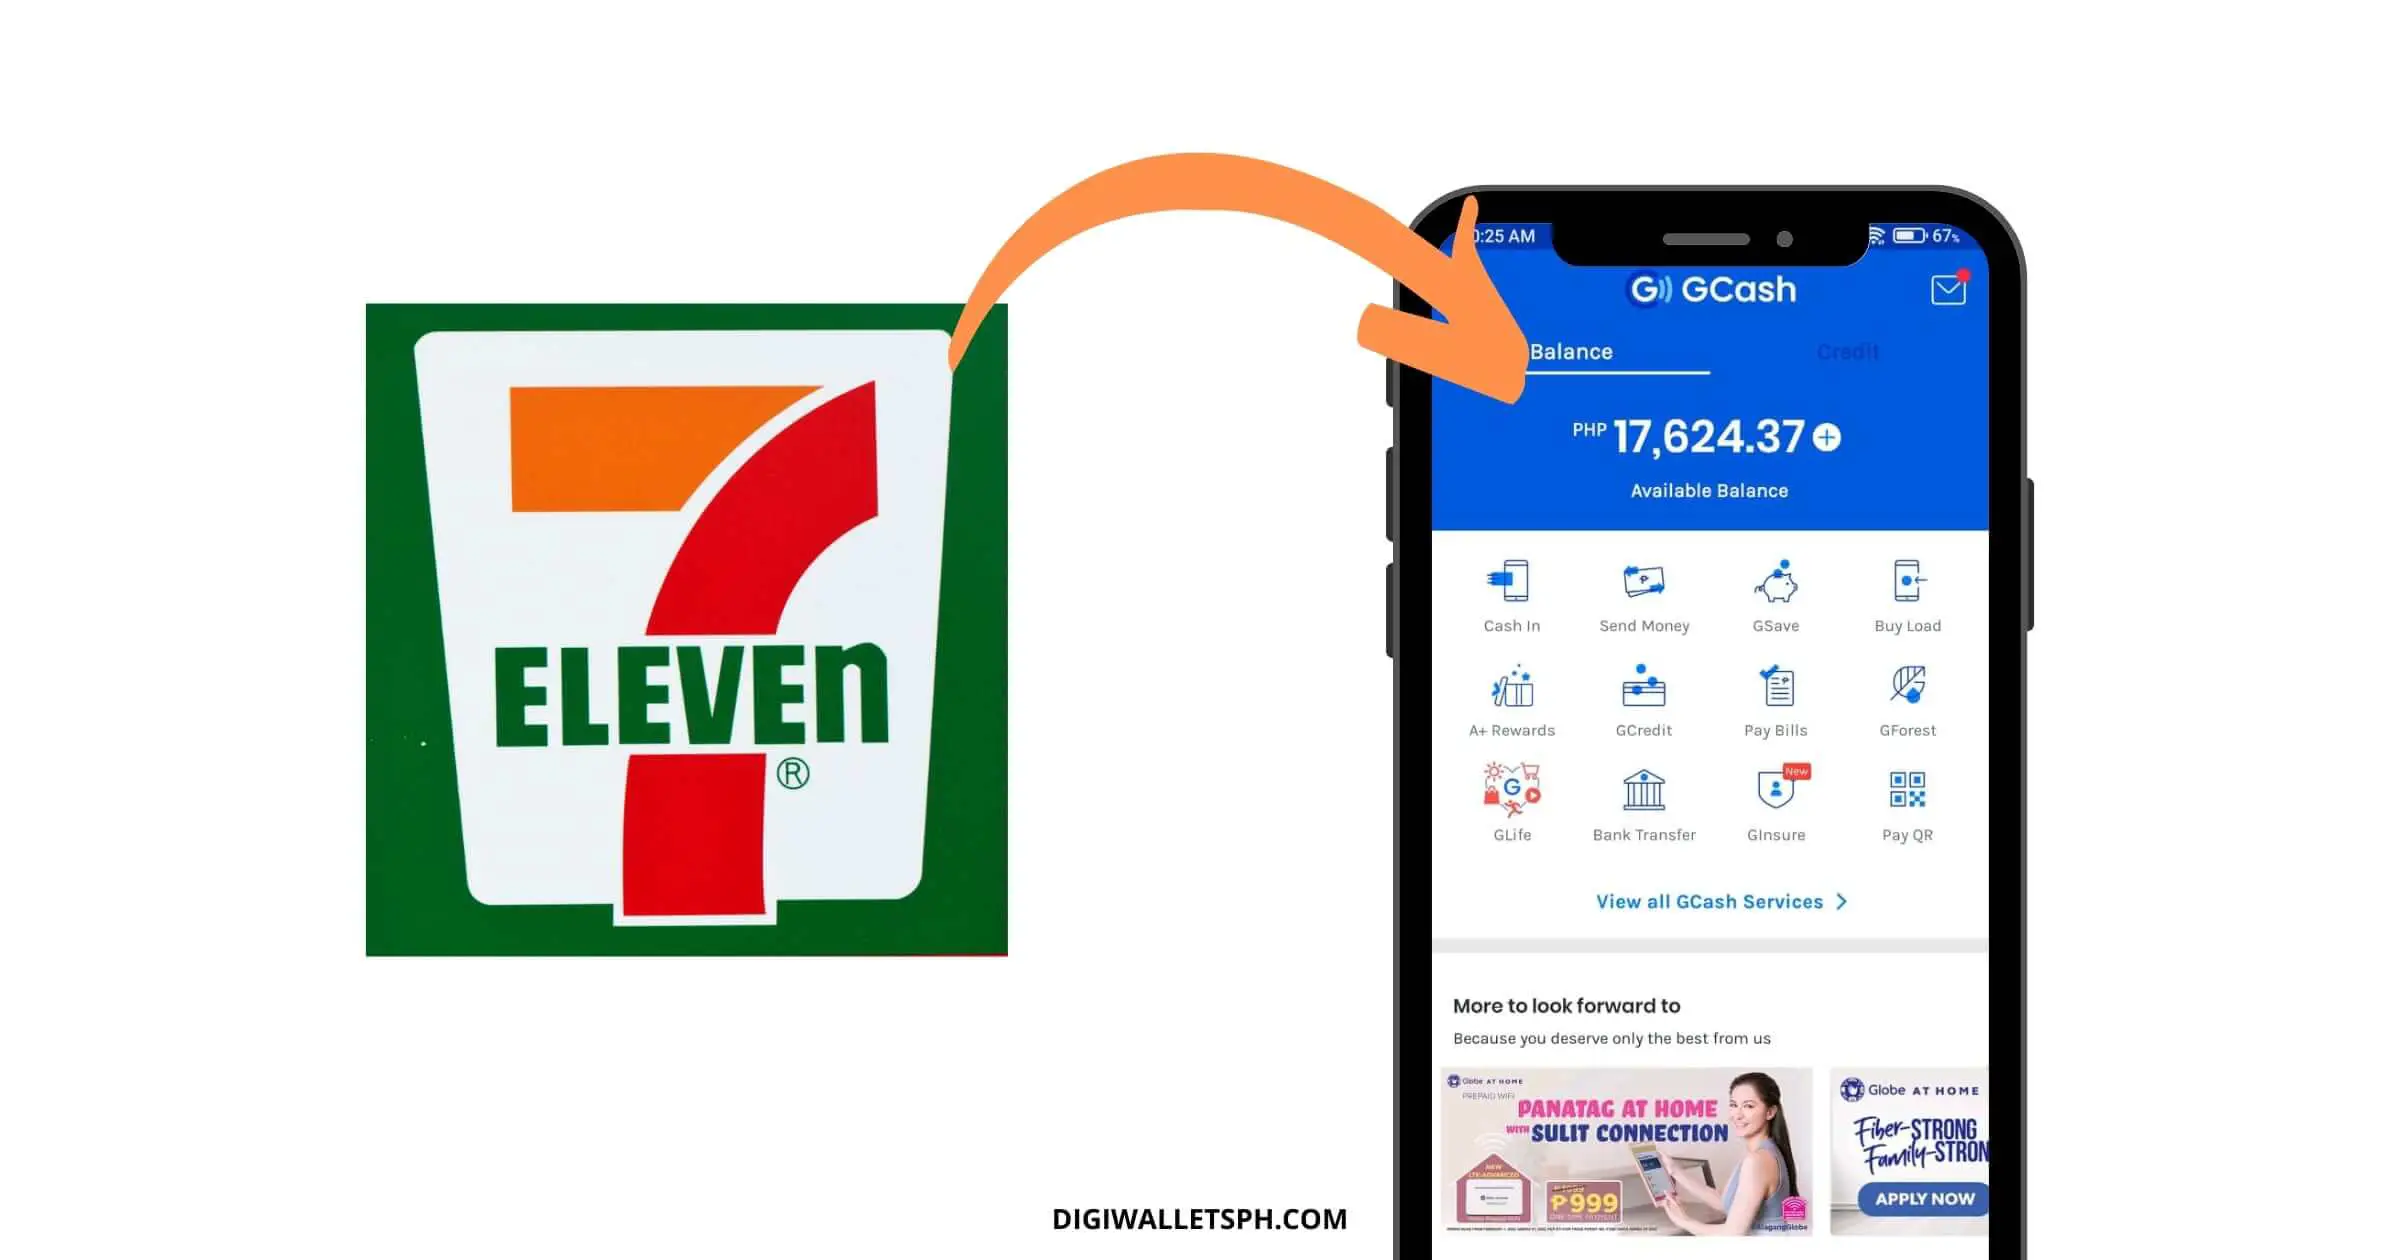 How to cash in GCash in 711